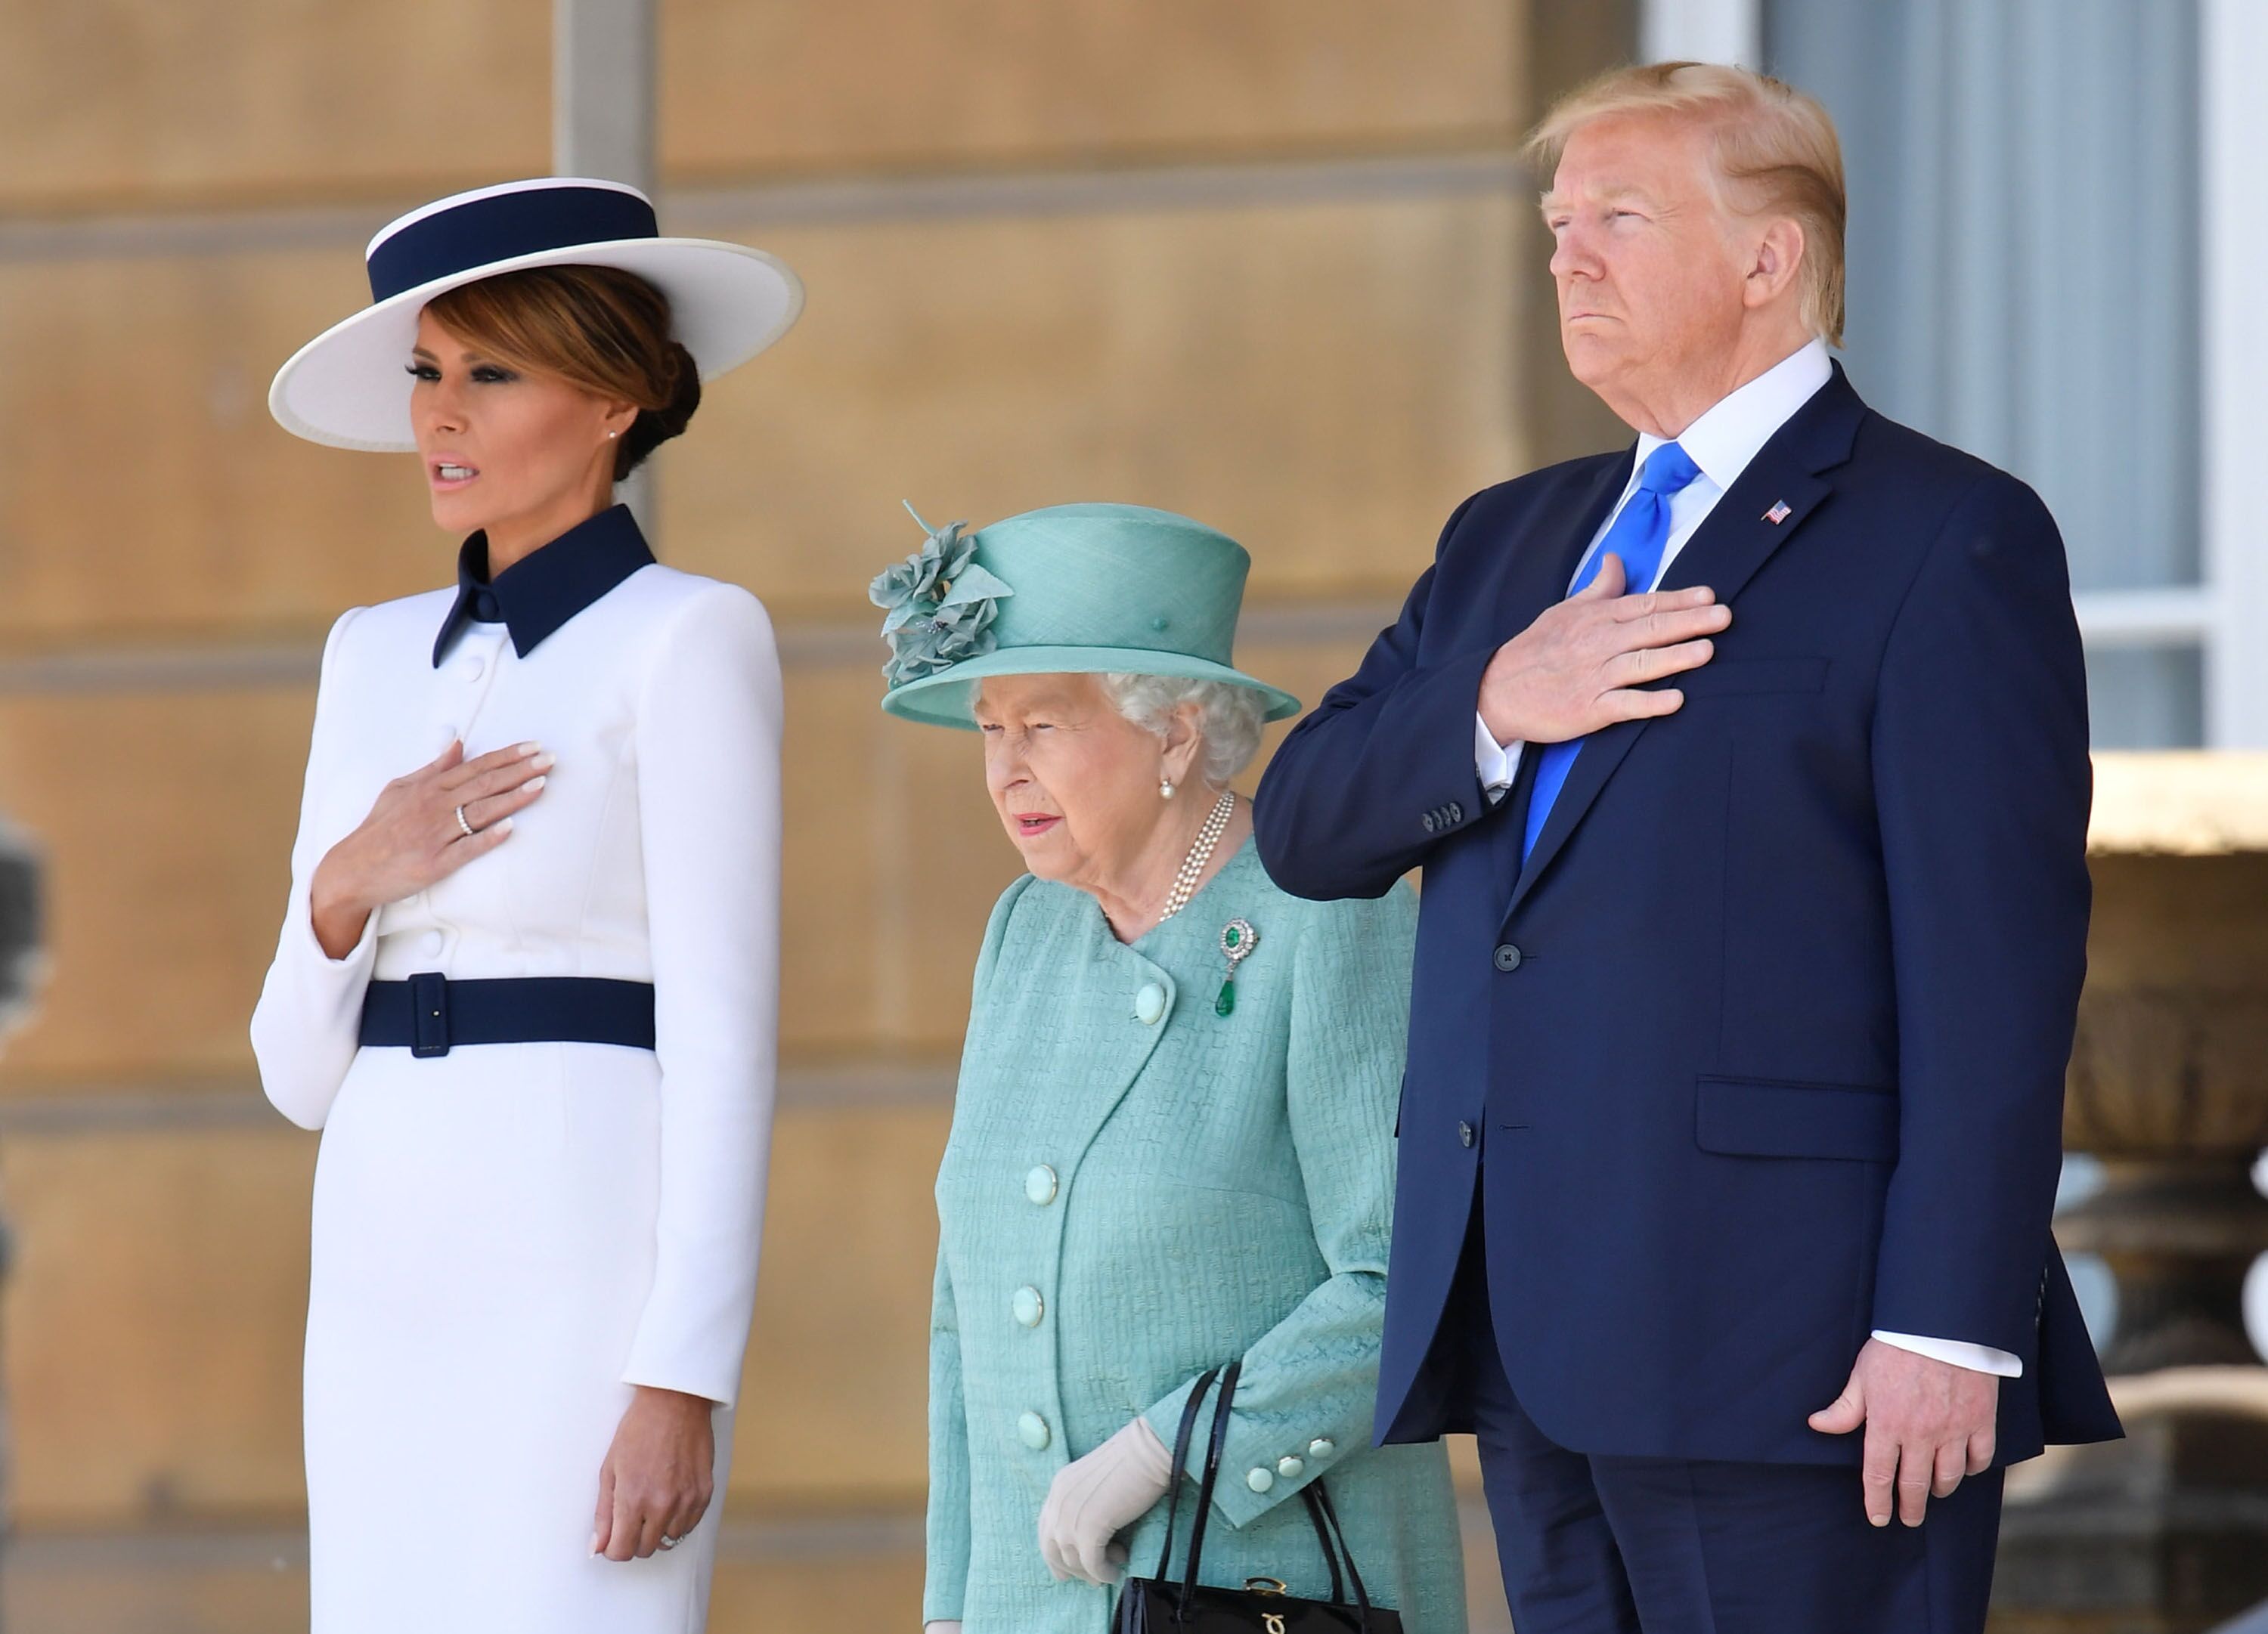 Melania Trump, Queen Elizabeth II and U.S. President Donald Trump at the Ceremonial Welcome in Buckingham Palace in 2019 | Source: Getty Images